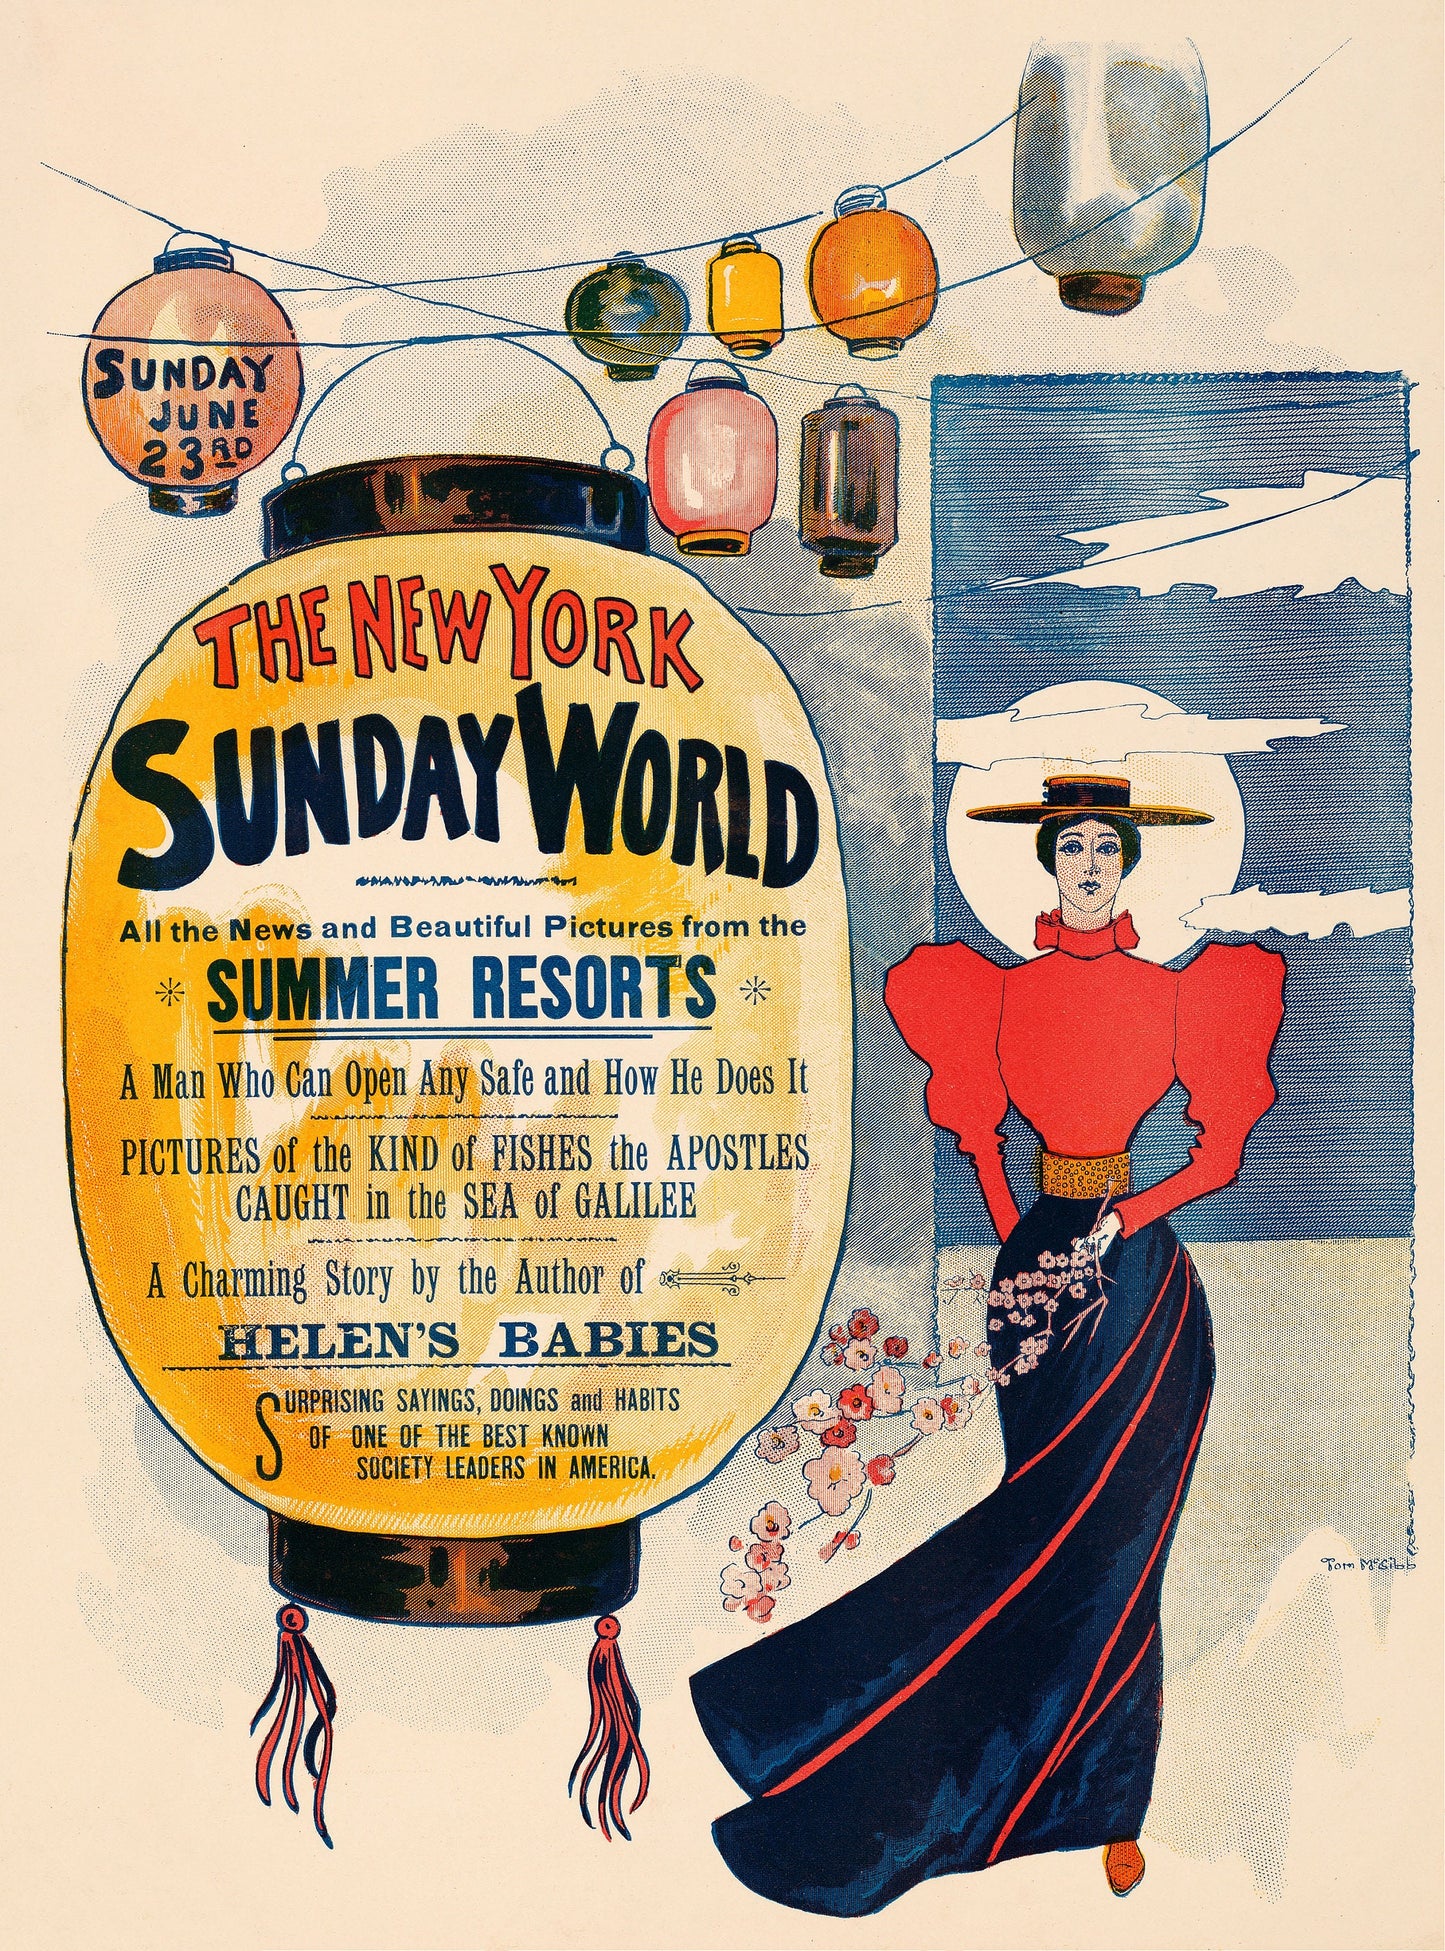 New York Sunday World Newspaper Covers [35 Images]